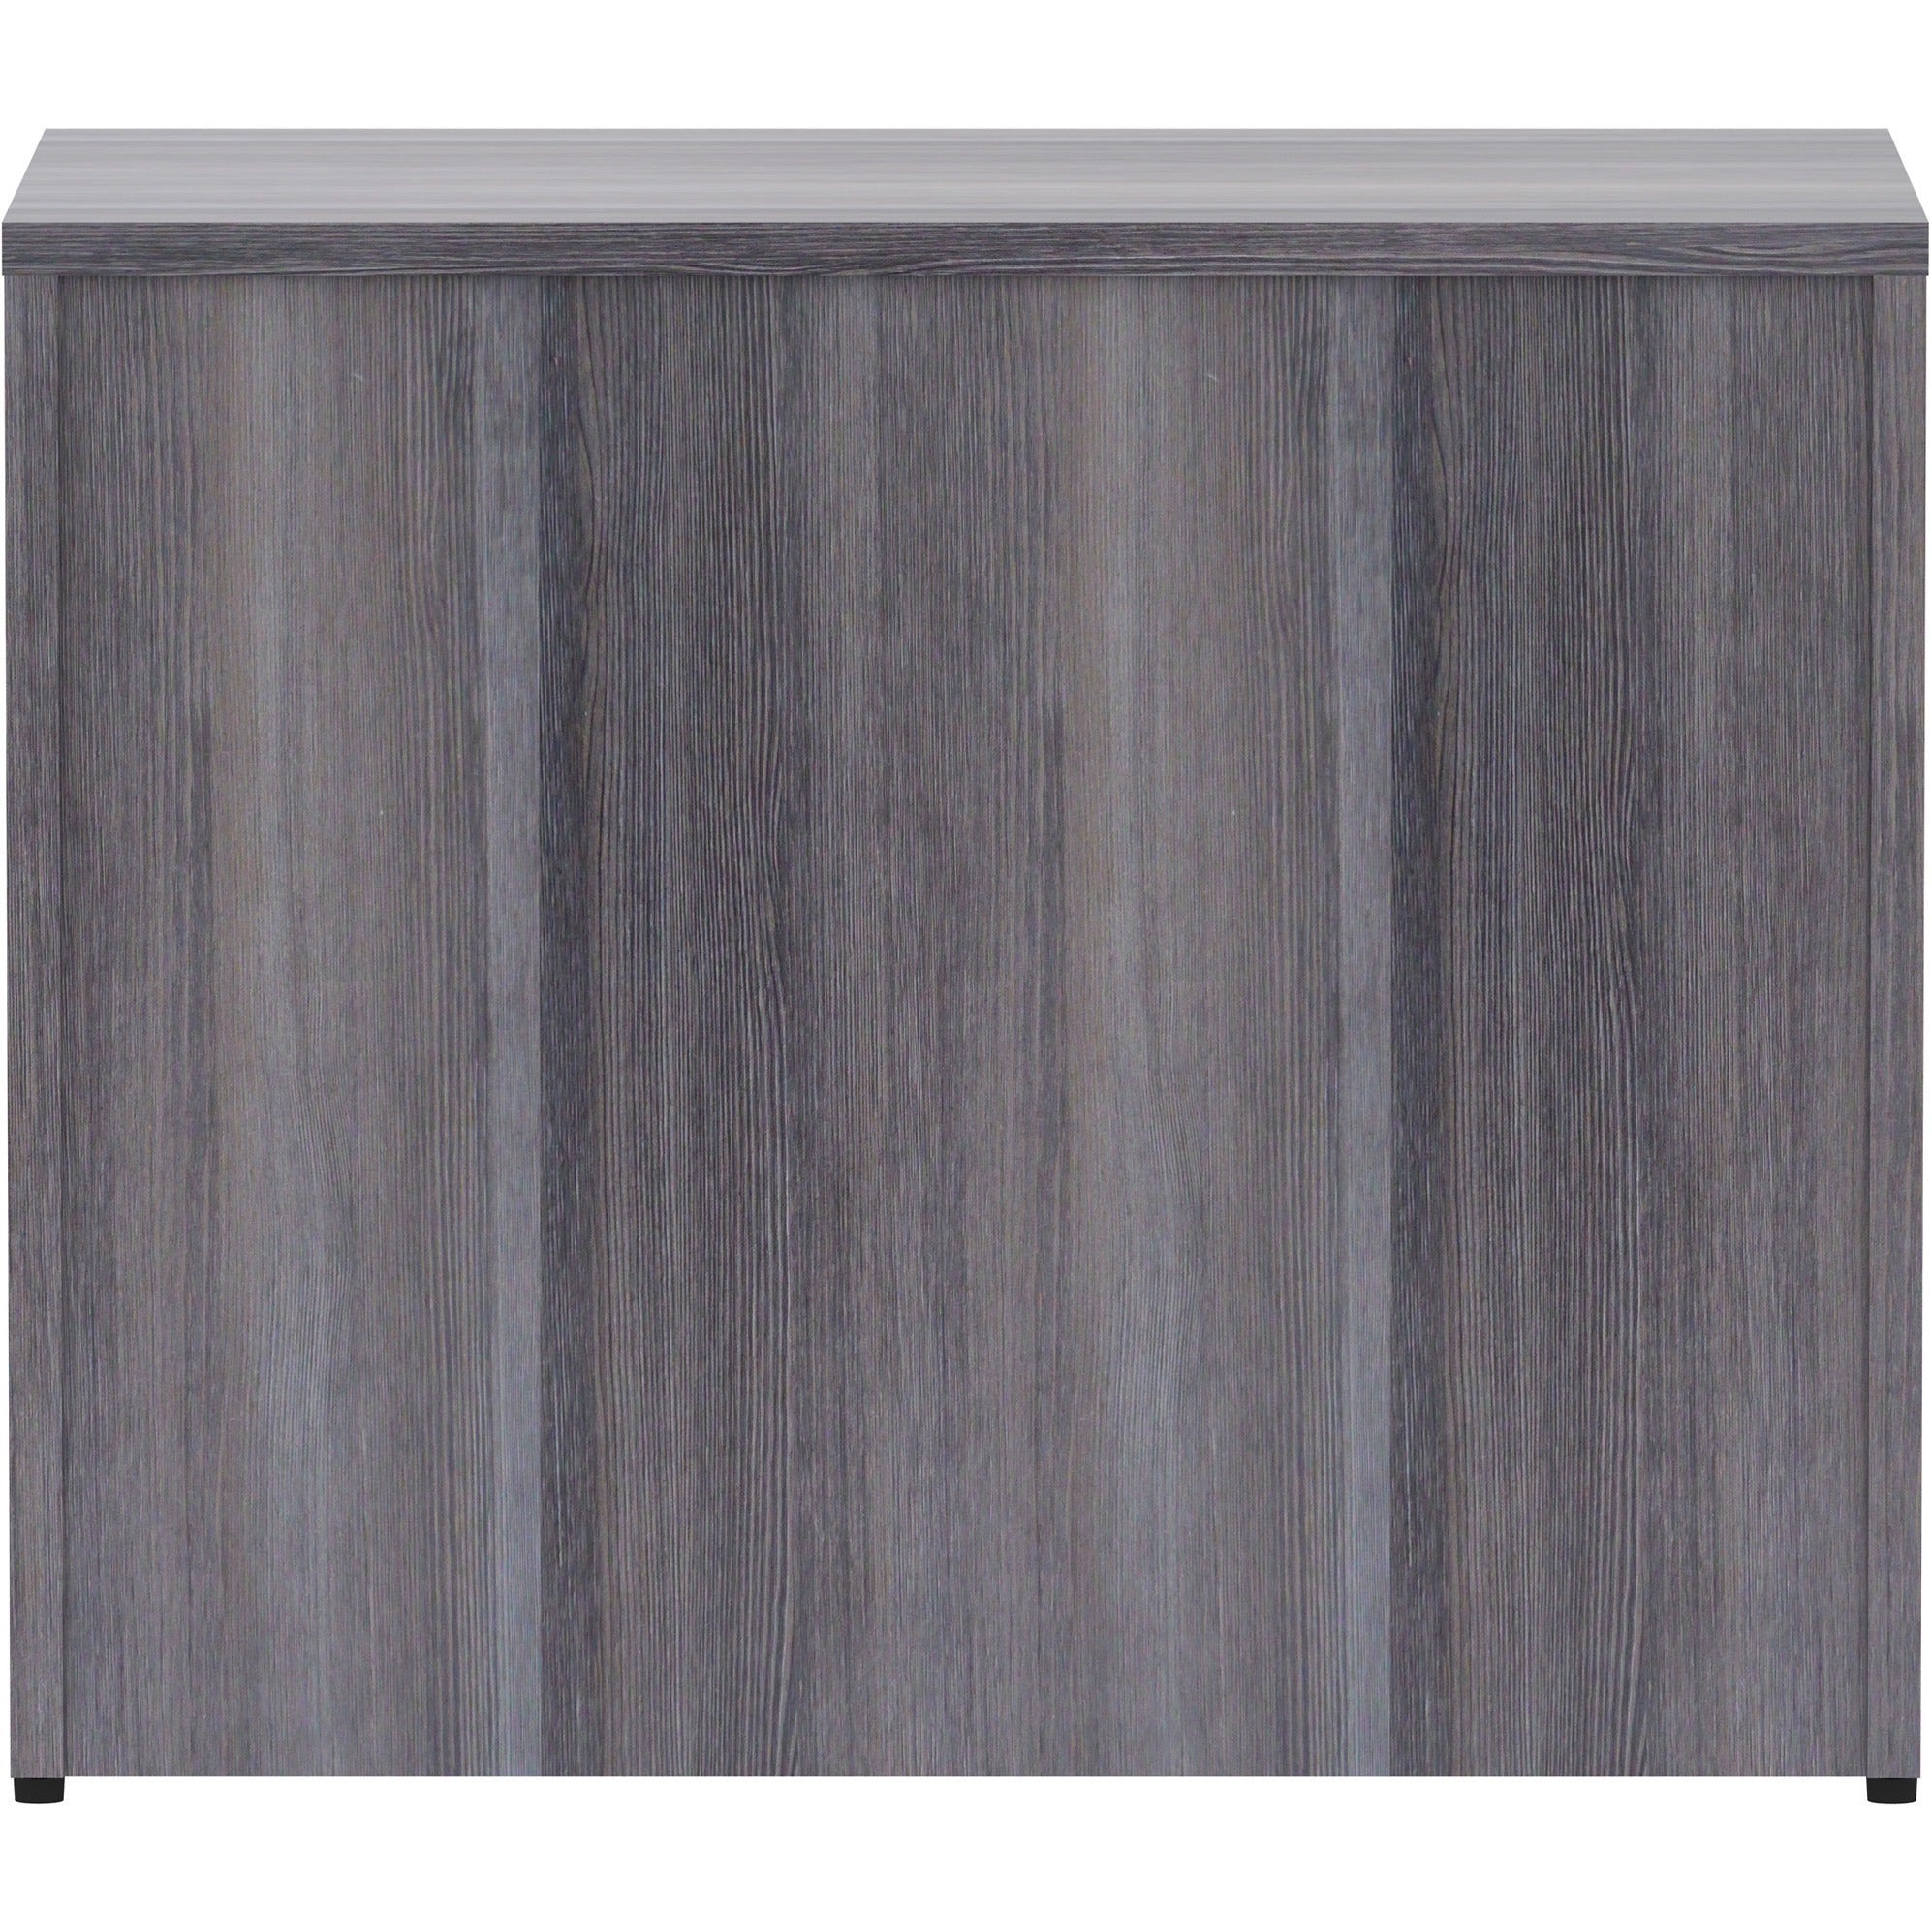 lorell-essentials-series-box-box-file-lateral-file-355-x-22295-lateral-file-1-top-4-x-file-box-drawers-finish-weathered-charcoal-laminate_llr69623 - 3